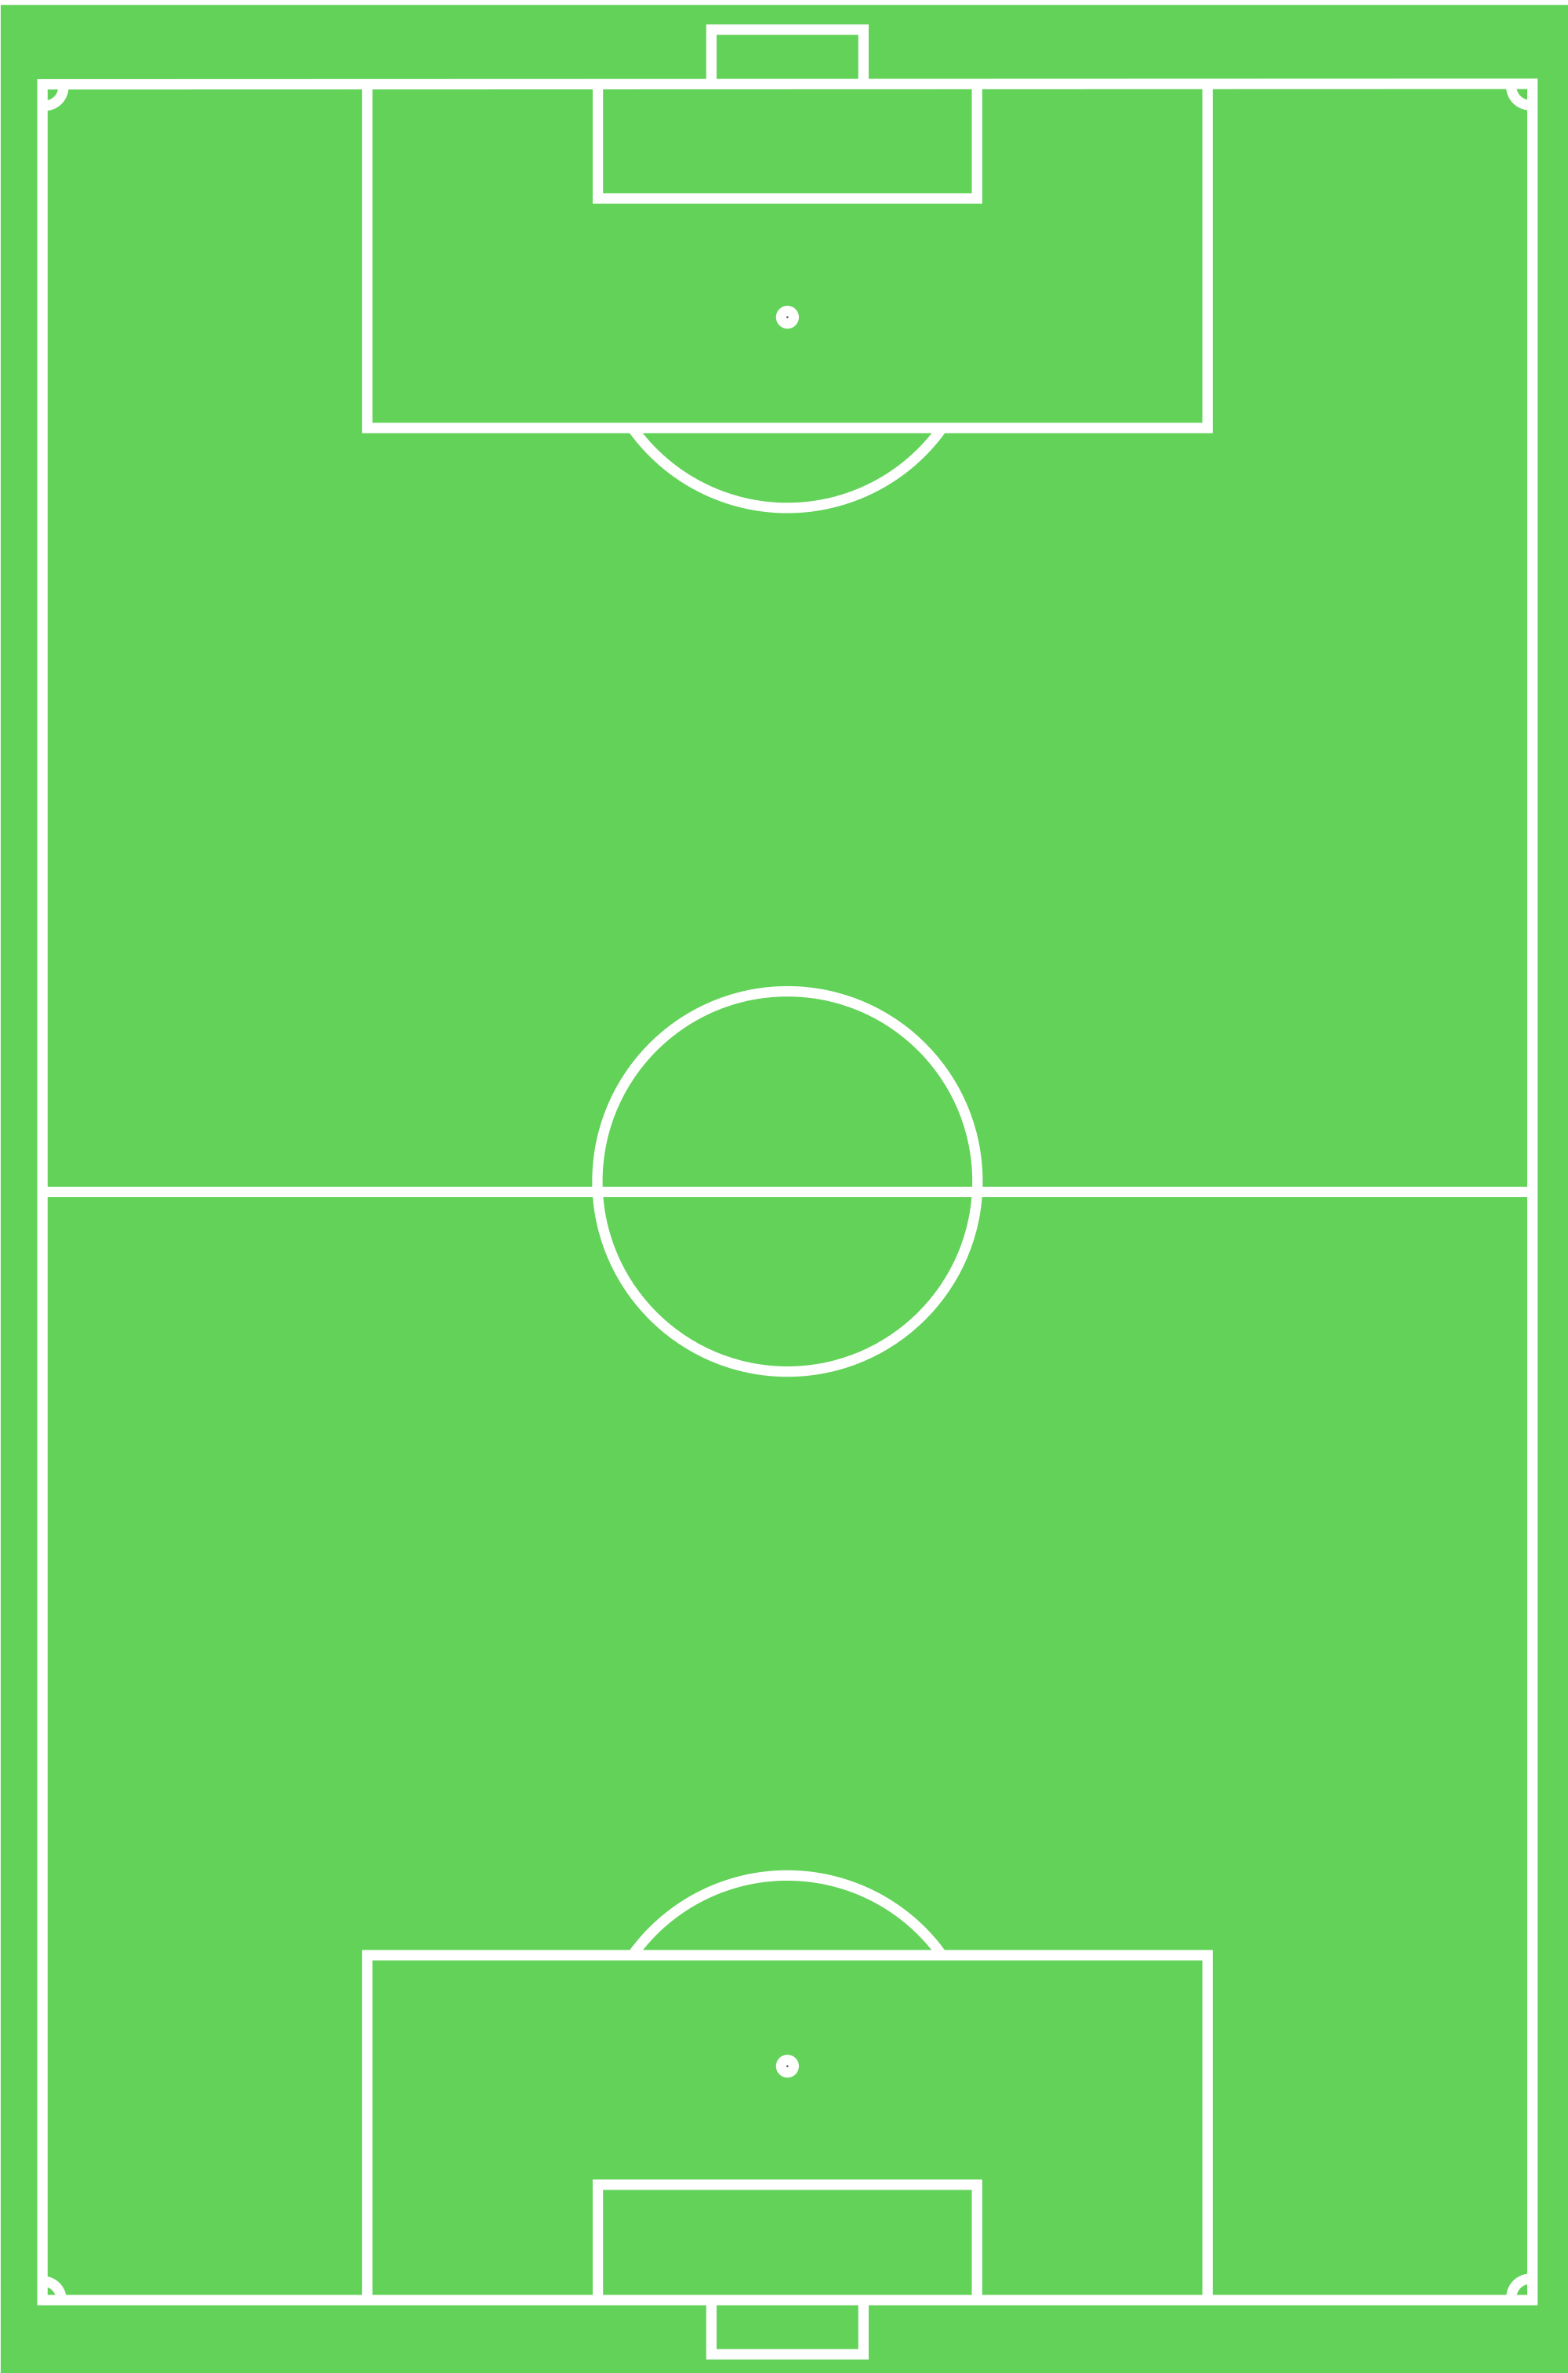 Draw a diagram of a football field showing all its dimensions  Sarthaks  eConnect  Largest Online Education Community